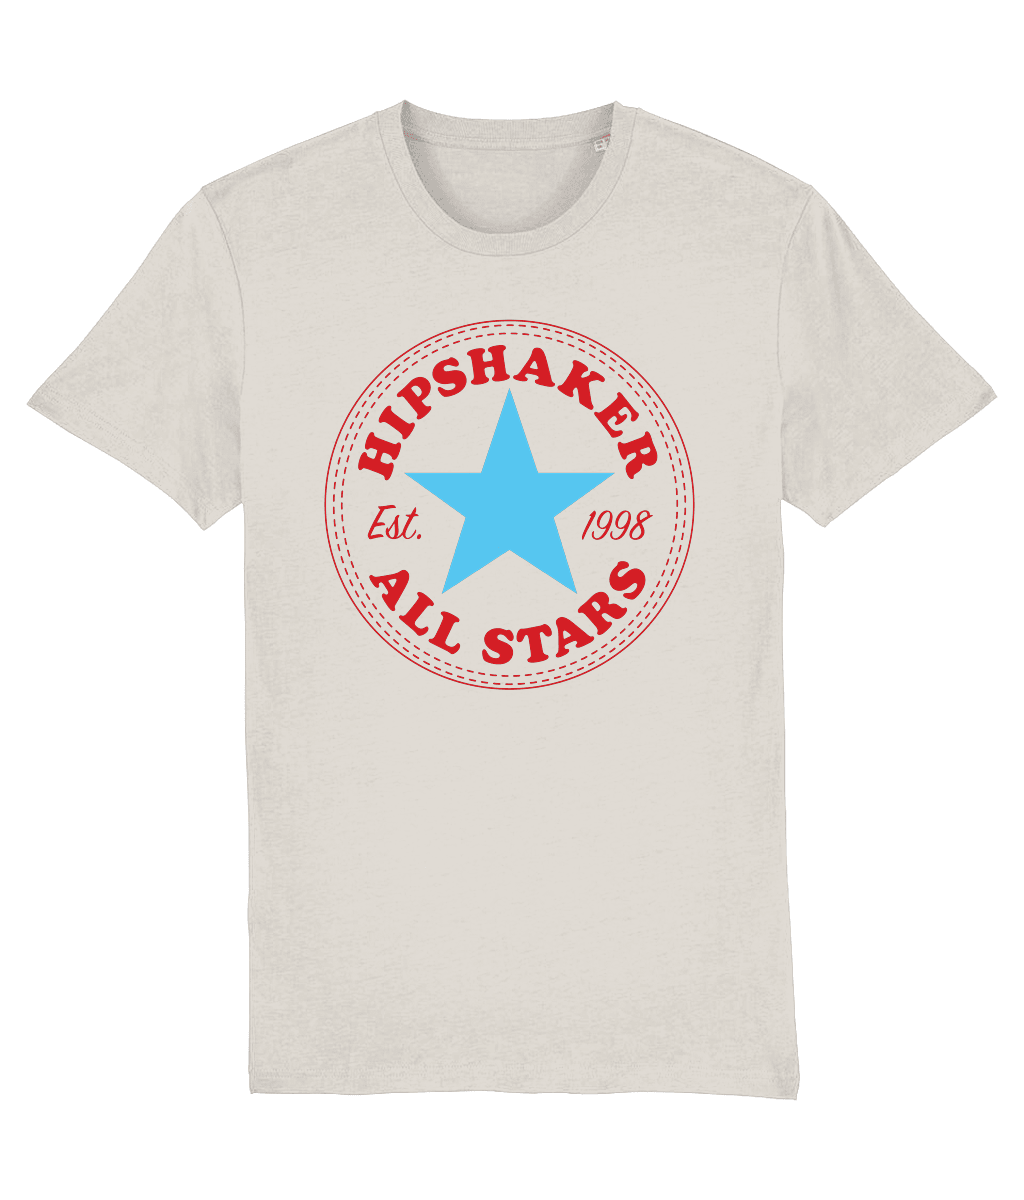 HIPSHAKER ALL STARS SKY: T-Shirt Official Merchandise of Hipshaker (3 Colour Options) - SOUND IS COLOUR